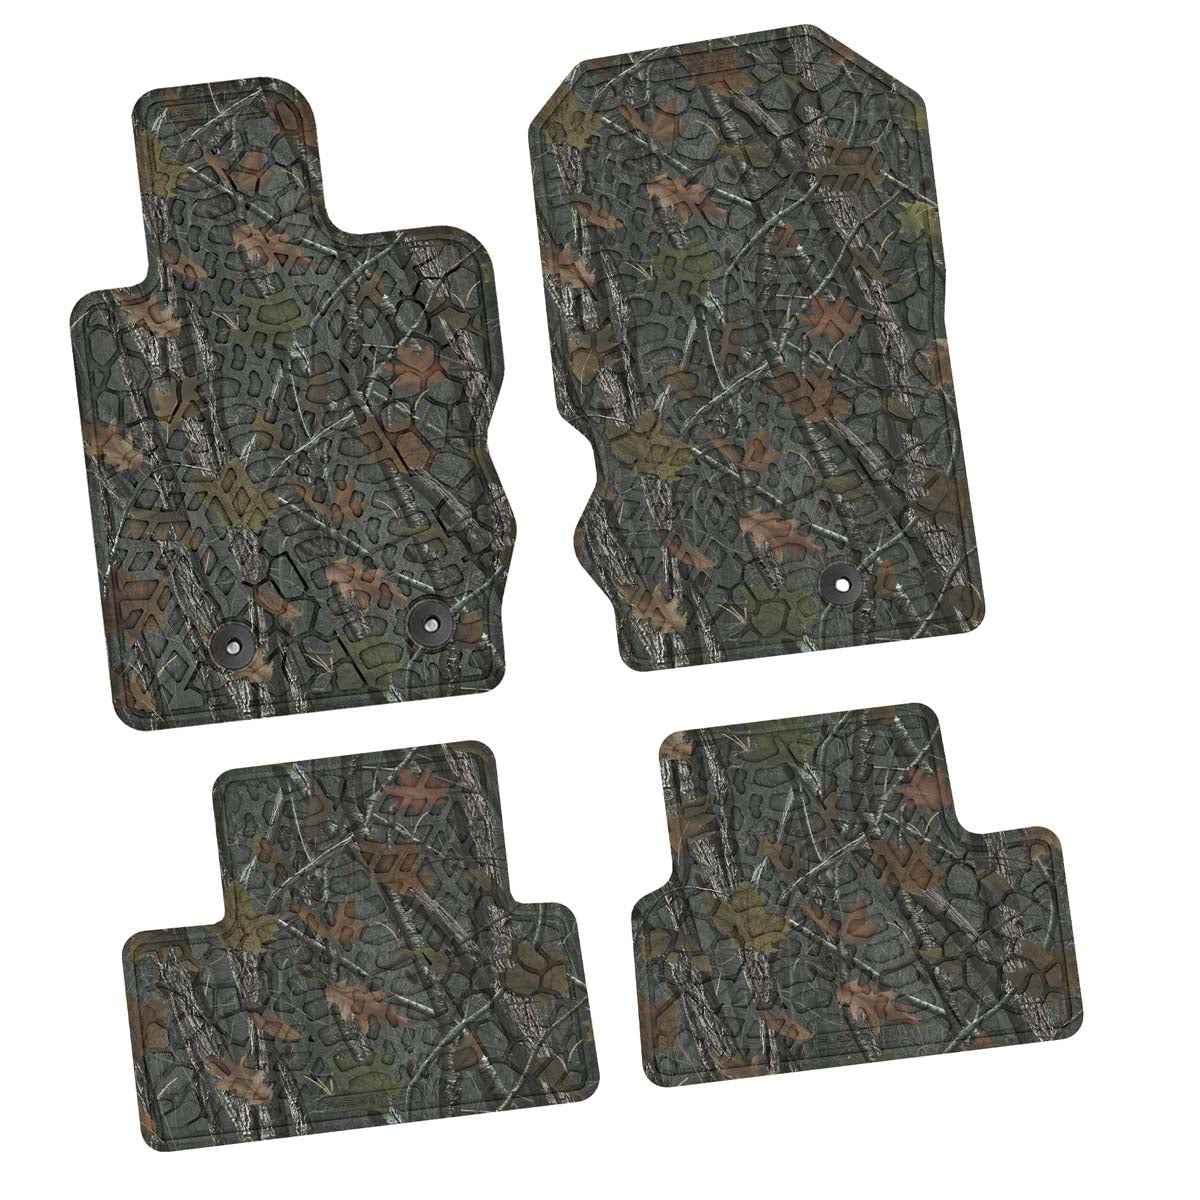 Bronco Floor Mats 21-23 Ford Bronco 2 Dr 4 Piece Tire Tread/Scorched Earth Scene - Rugged Woods FlexTread